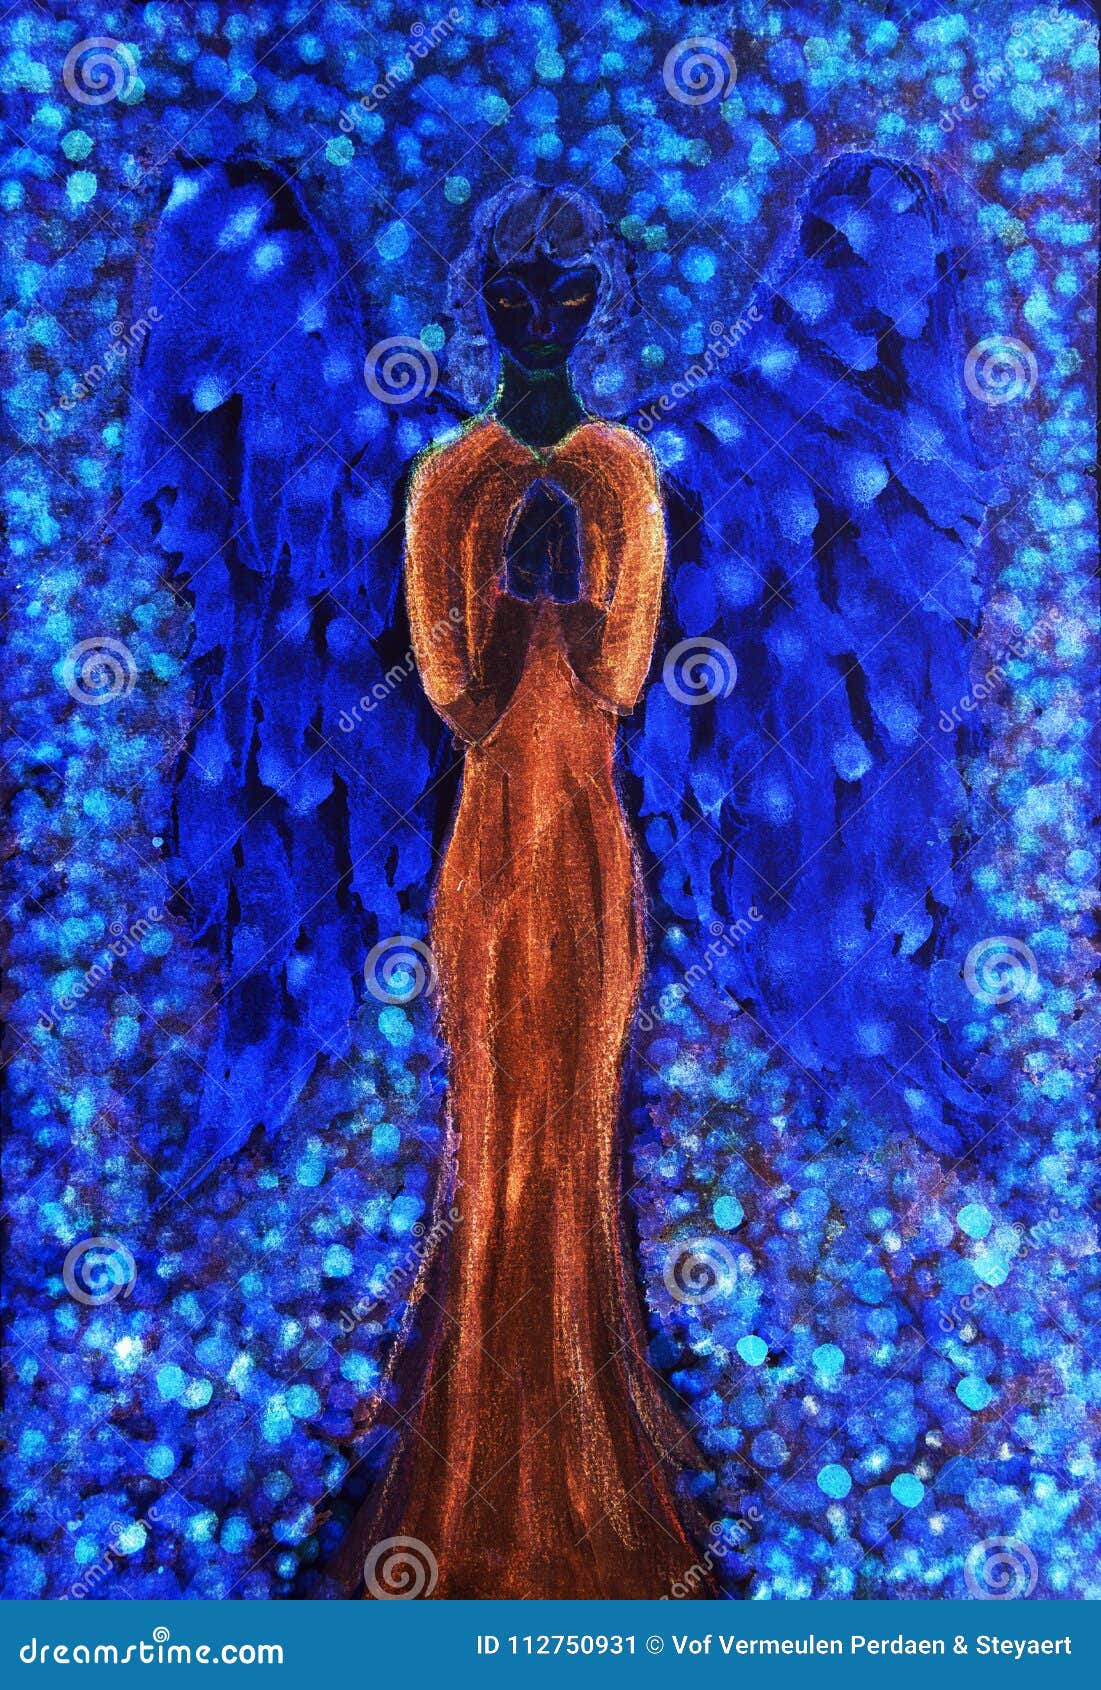 black female angel with a red dress praying.